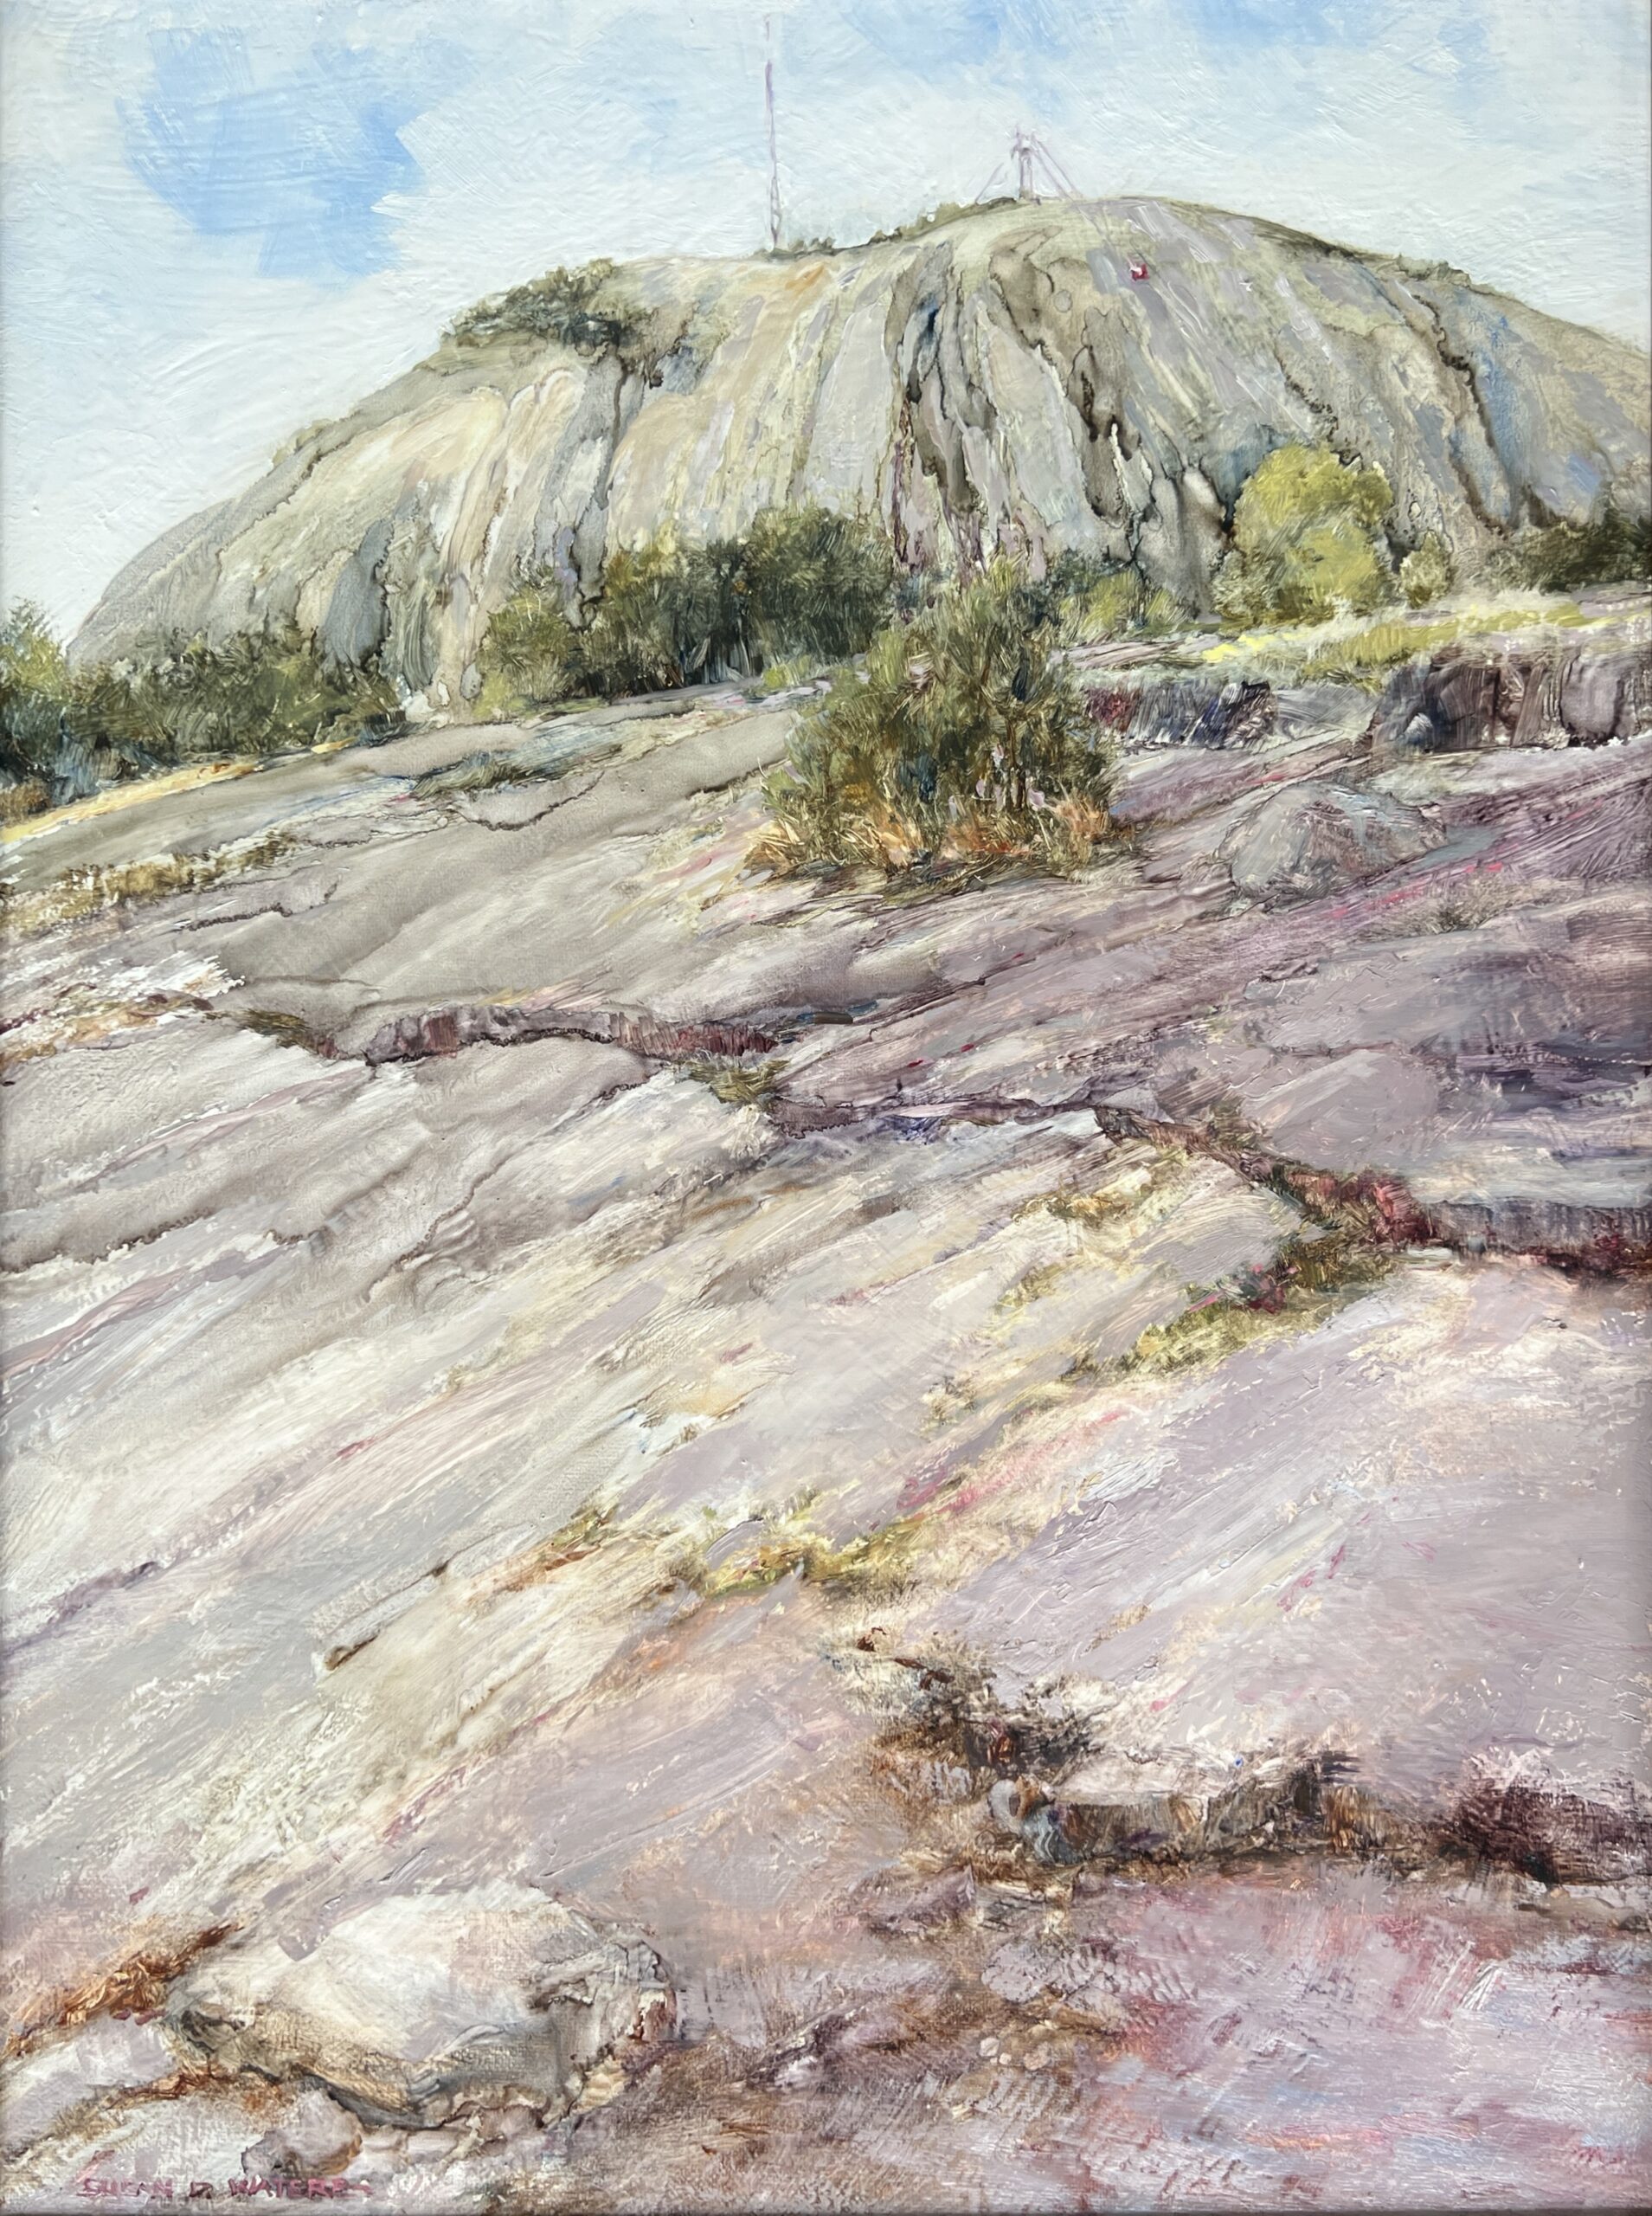 Spirit of Atlanta award: "Monolith" by Susan D. Waters, 24x18 in., Oil on Cotton Canvas